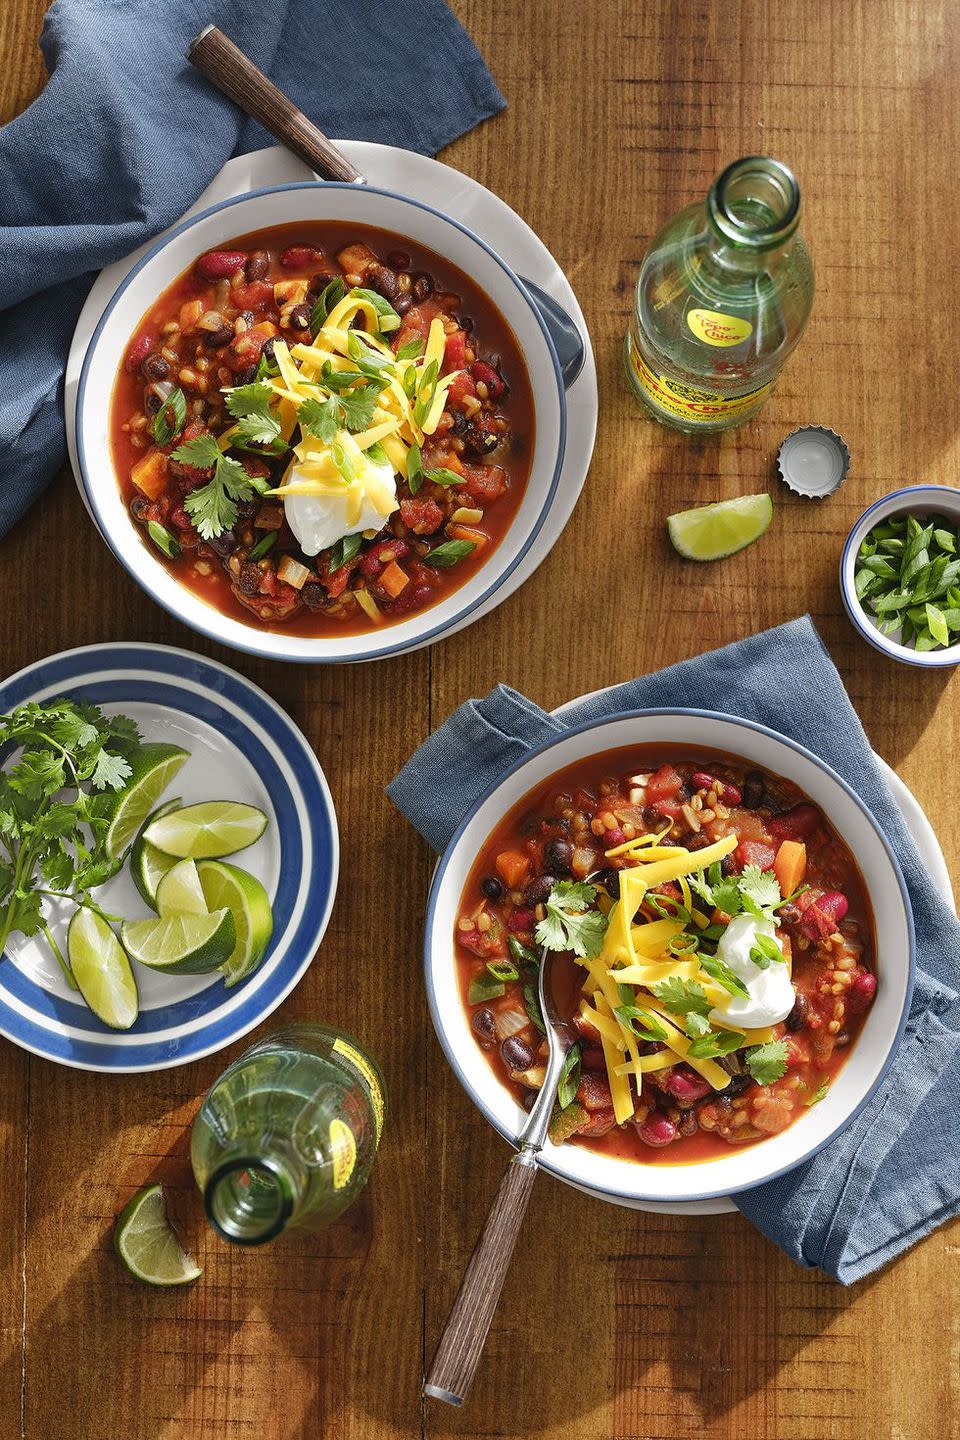 <p>The secret ingredient that keeps this classic dish every bit as meaty and filling as its beefier brethren? Wheat berries, which you can pick up in the grain section of most grocery stores.</p><p><strong><a href="https://www.countryliving.com/food-drinks/a30417636/vegetarian-chili-with-grains-beans-recipe/" rel="nofollow noopener" target="_blank" data-ylk="slk:Get the recipe" class="link ">Get the recipe</a>.</strong></p><p><strong><a class="link " href="https://www.amazon.com/Berries-Non-GMO-Verified-Non-Irradiated-Certified/dp/B004LYXHKG/?tag=syn-yahoo-20&ascsubtag=%5Bartid%7C10050.g.1186%5Bsrc%7Cyahoo-us" rel="nofollow noopener" target="_blank" data-ylk="slk:SHOP WHEAT BERRIES">SHOP WHEAT BERRIES</a></strong> </p>